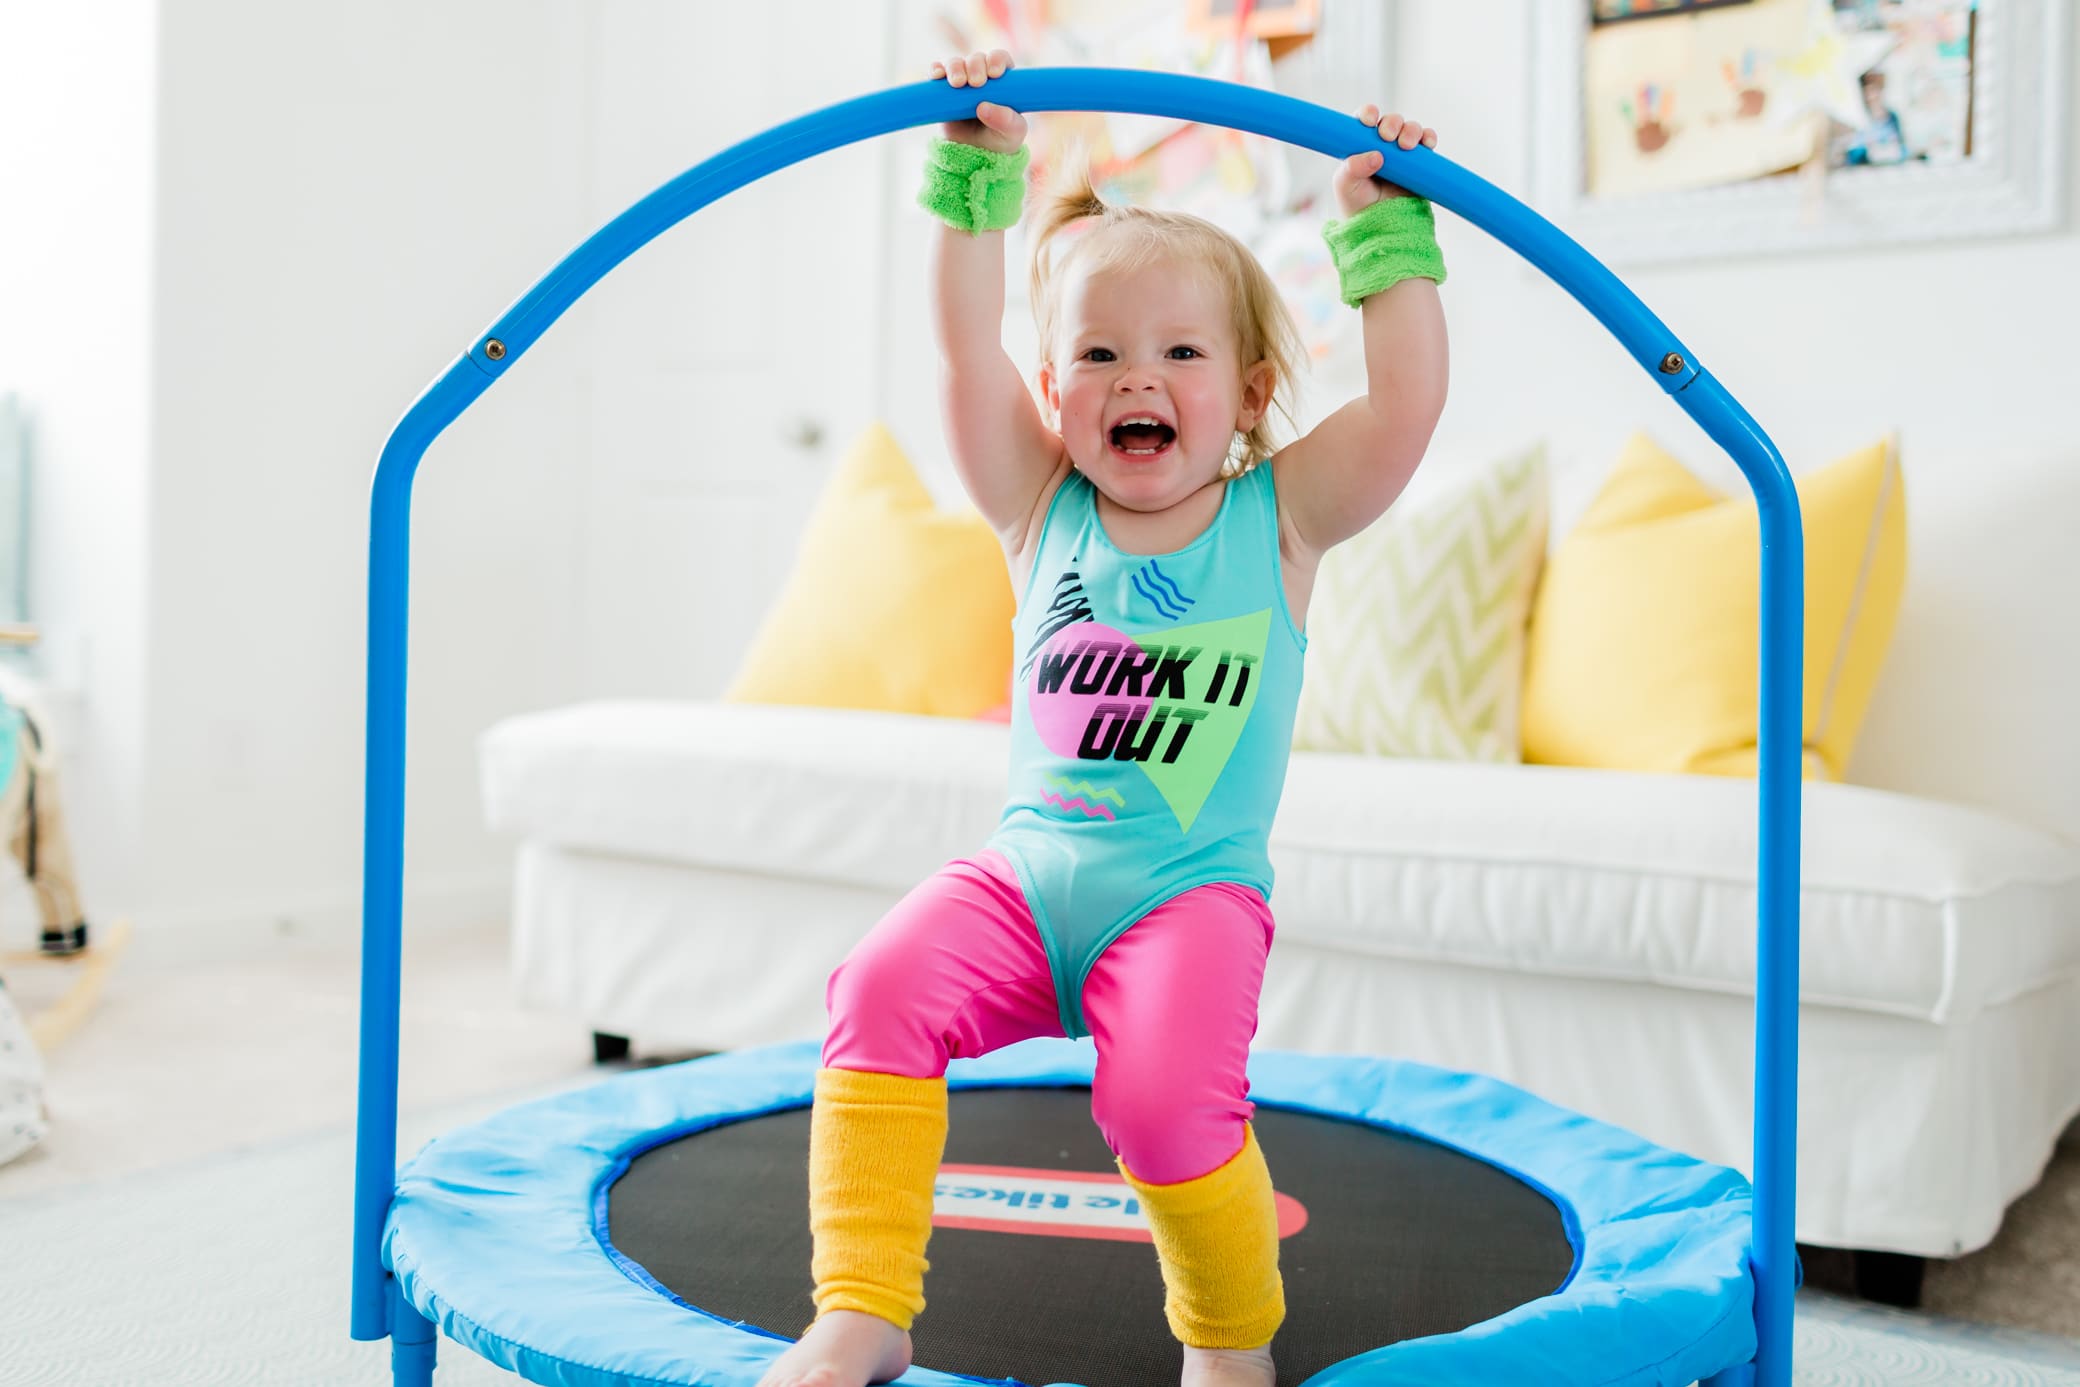 Young toddler girl in a workout outfit jumping on a small kid's trampoline.